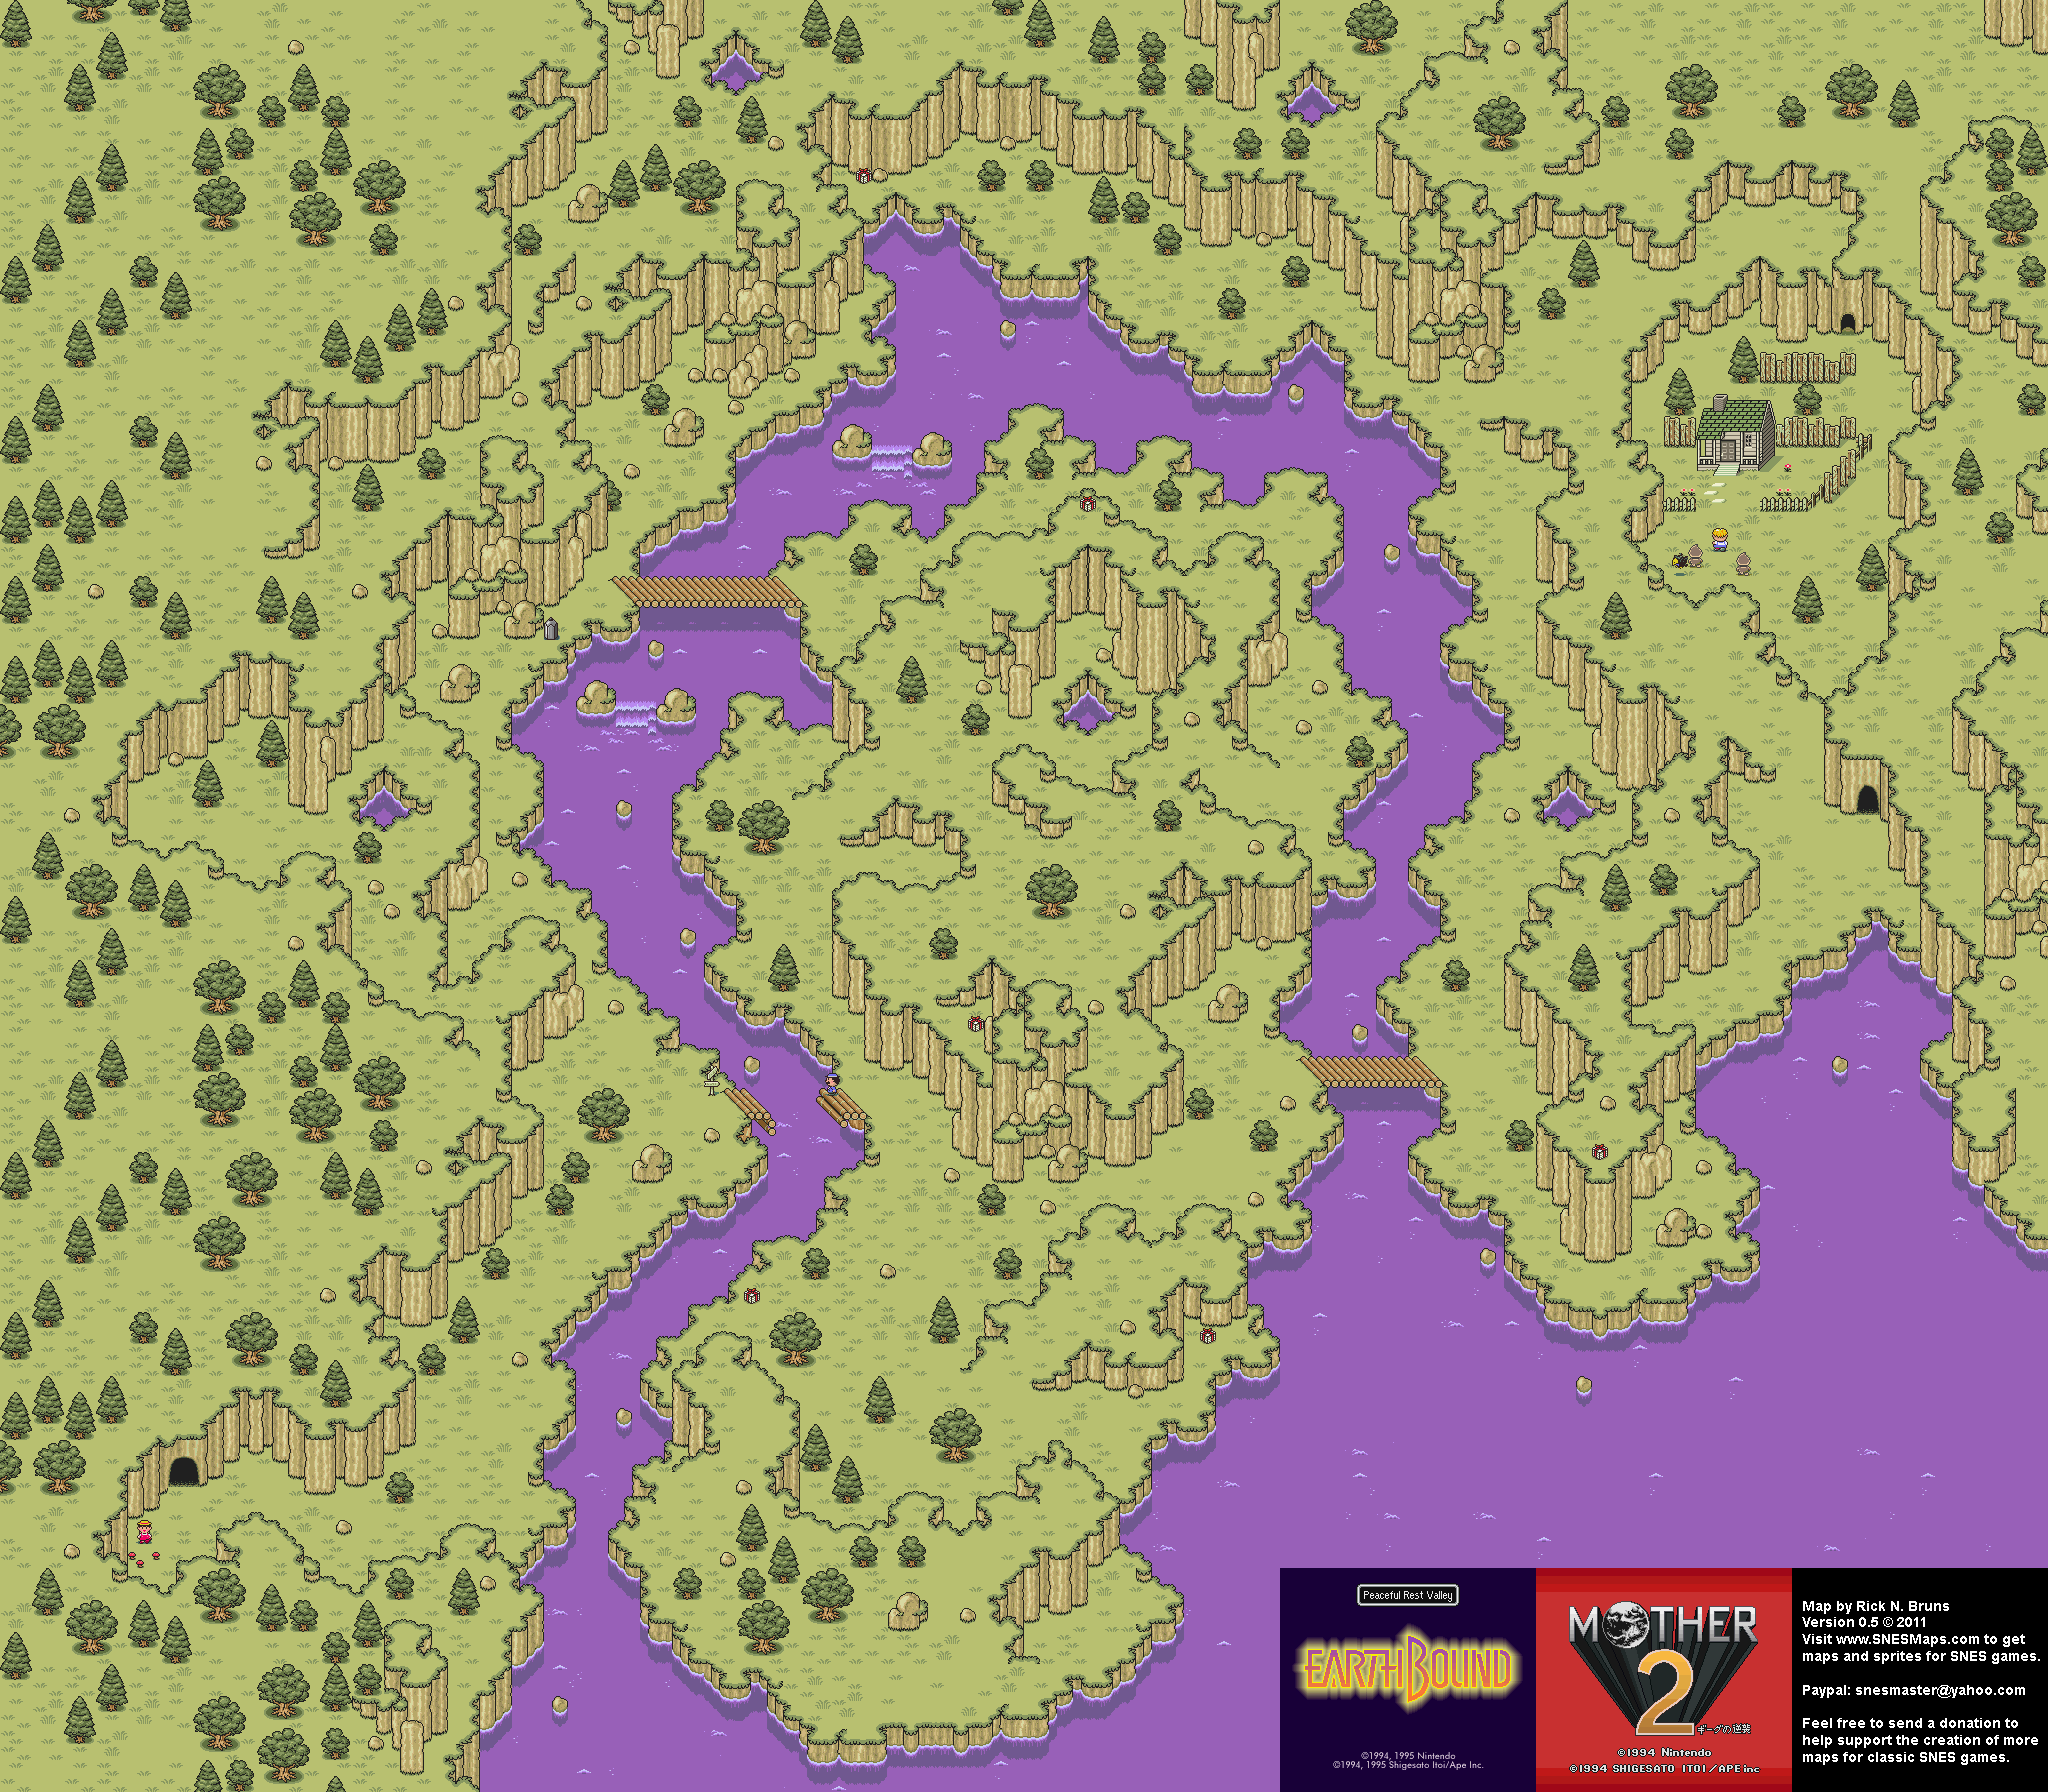 EarthBound (Mother 2) - Peaceful Rest Valley Super Nintendo SNES Map